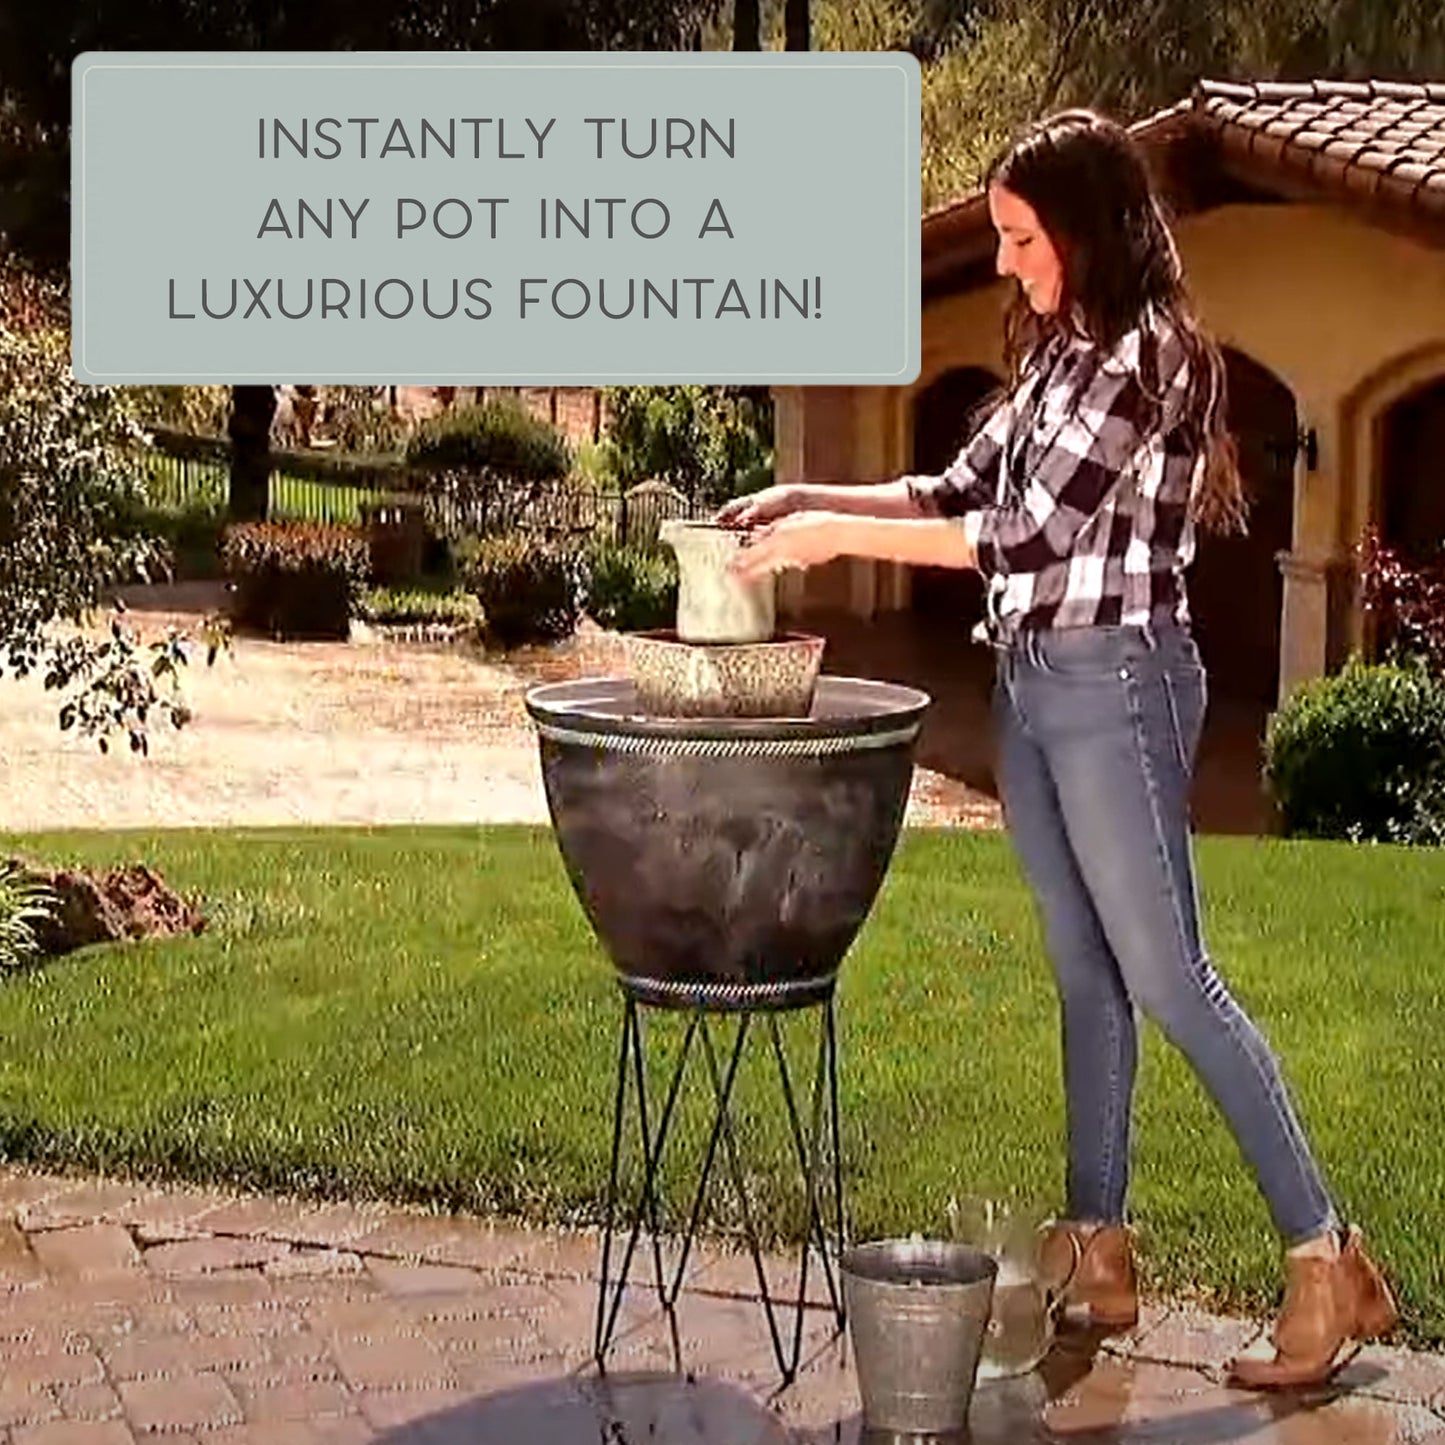 4-in-1 Fountain Tower w/Planter Bowl